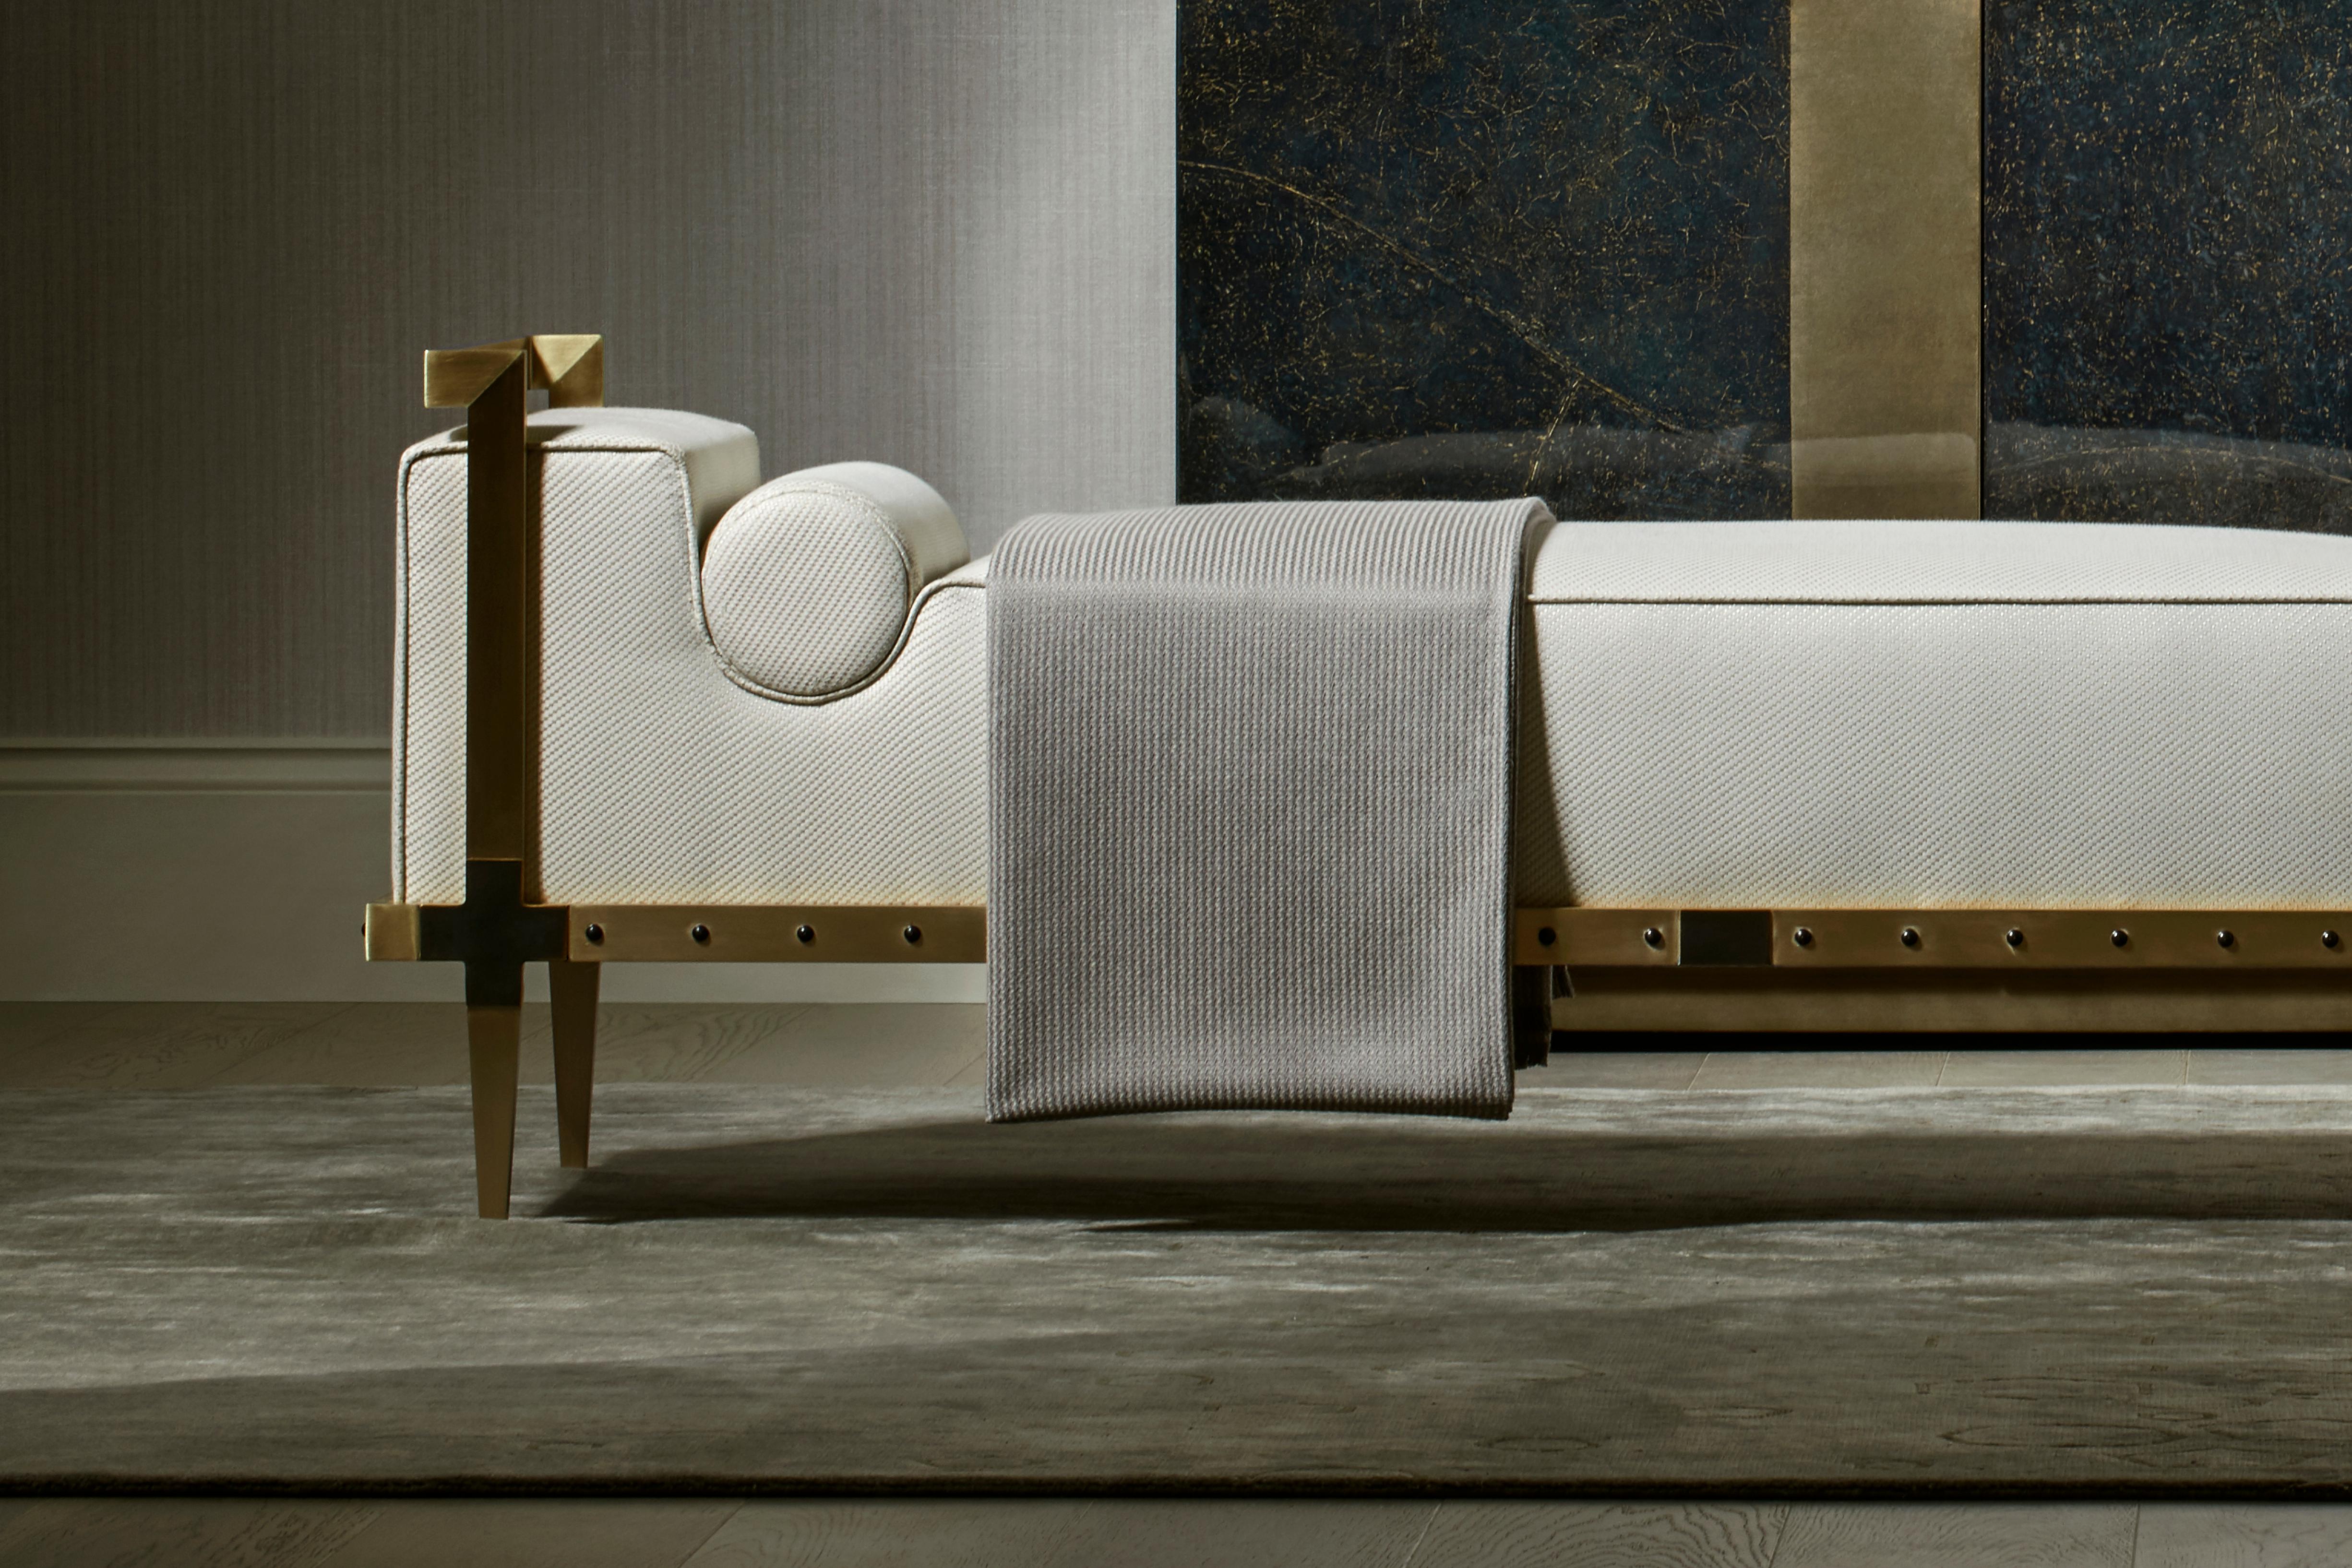 A contemporary yet timeless tribute to the ‘love seat’, the design is upholstered in a tailored fabric with hand piping to enhance the silhouette. 

The striking solid brushed brass and bronze frame is finished with an elegant studded detail.